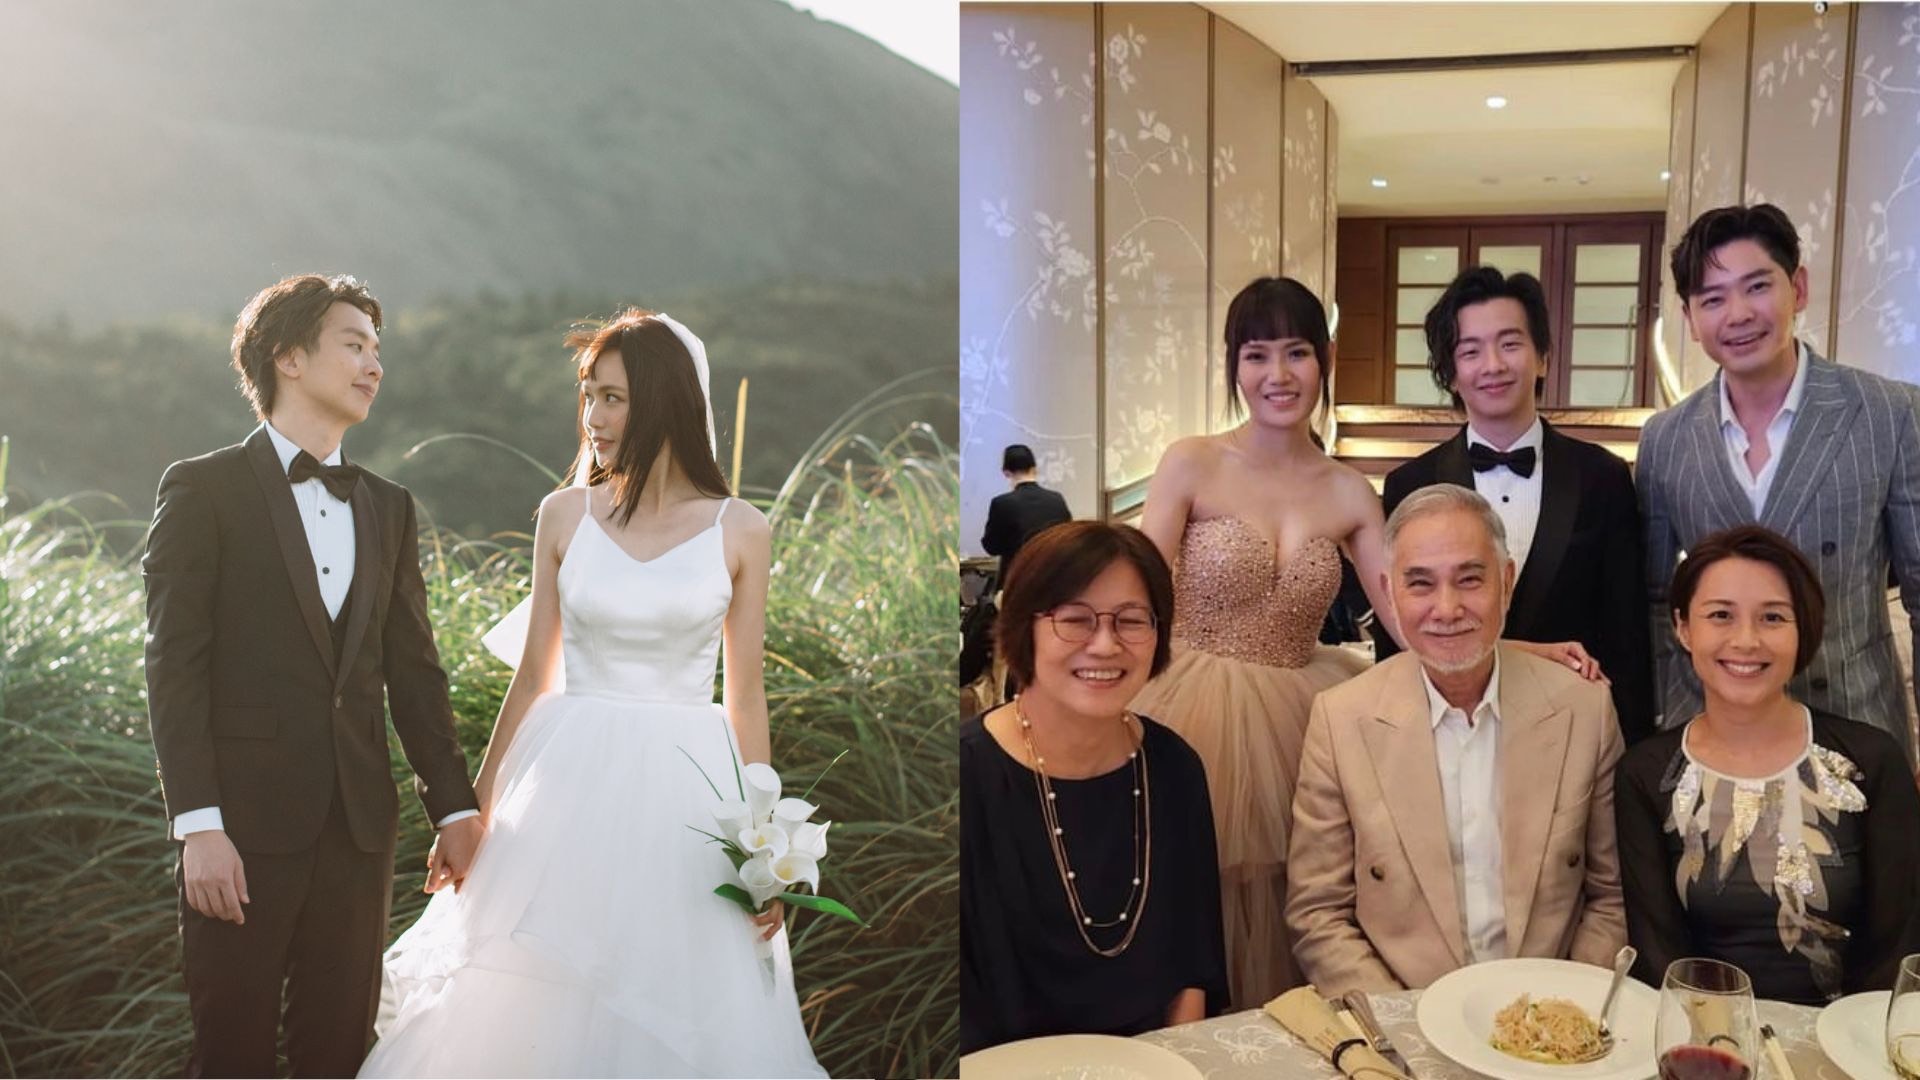 Local and foreign stars arrived for singer Boon Hui Lu’s wedding at the Fullerton Hotel ➤ Buzzday.info